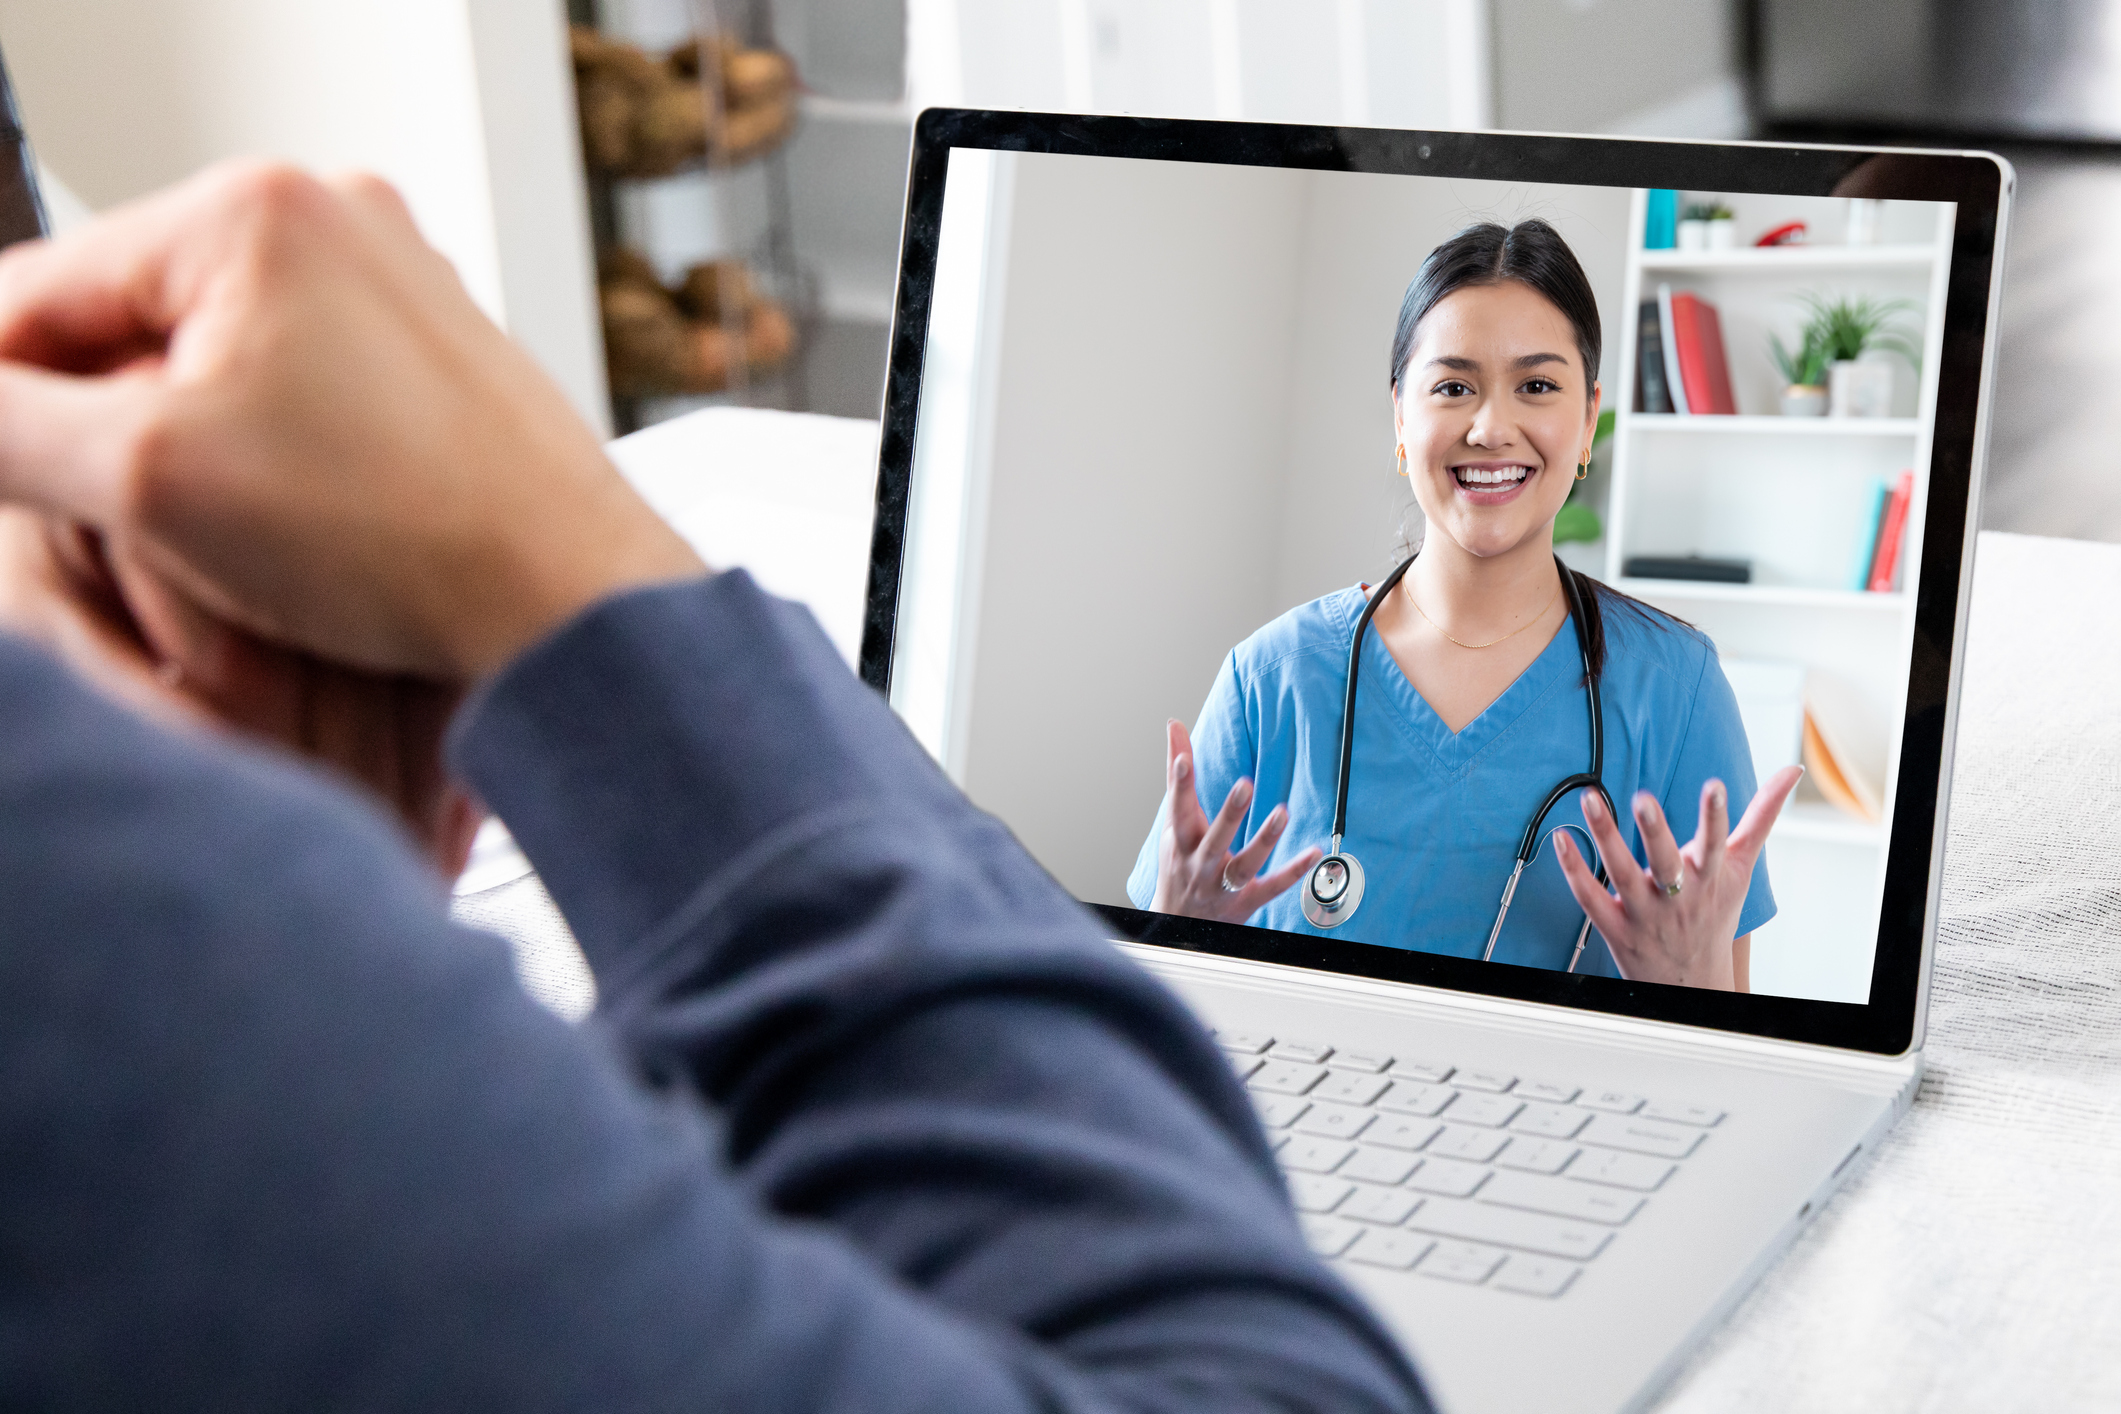 For Cancer Patients, Telemedicine Tops In-Person Visits